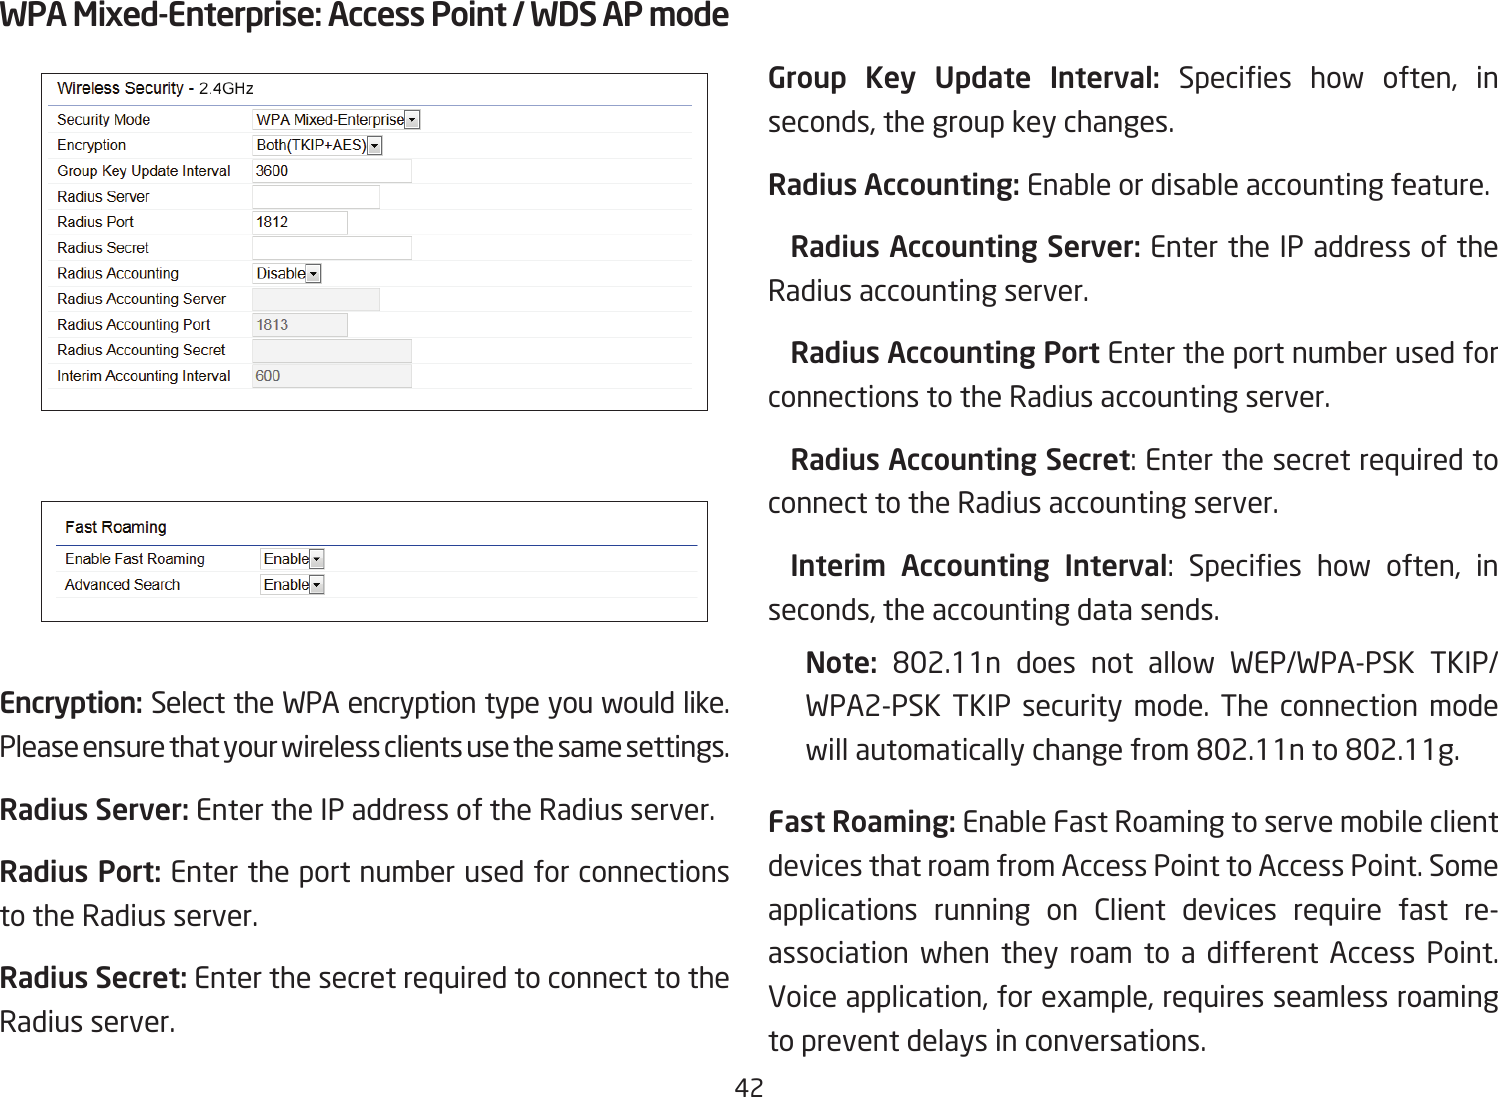 42WPA Mixed-Enterprise: Access Point / WDS AP modeEncryption: Select the WPA encryption type you would like. Please ensure that your wireless clients use the same settings.Radius Server: Enter the IP address of the Radius server.Radius Port: Enter the port number used for connections to the Radius server.Radius Secret: Enter the secret required to connect to the Radius server. Group Key Update Interval: Species how often, inseconds, the group key changes.Radius Accounting: Enable or disable accounting feature.  Radius Accounting Server: Enter the IP address of the Radius accounting server. Radius Accounting Port Enter the port number used for connections to the Radius accounting server. Radius Accounting Secret: Enter the secret required to connect to the Radius accounting server. Interim  Accounting  Interval: Species how often, inseconds, the accounting data sends.Note:  802.11n does not allow WEP/WPA-PSK TKIP/WPA2-PSK TKIP security mode. The connection mode willautomaticallychangefrom802.11nto802.11g.Fast Roaming: Enable Fast Roaming to serve mobile client devices that roam from Access Point to Access Point. Some applications running on Client devices require fast re-association when they roam to a different Access Point. Voice application, for example, requires seamless roaming to prevent delays in conversations.